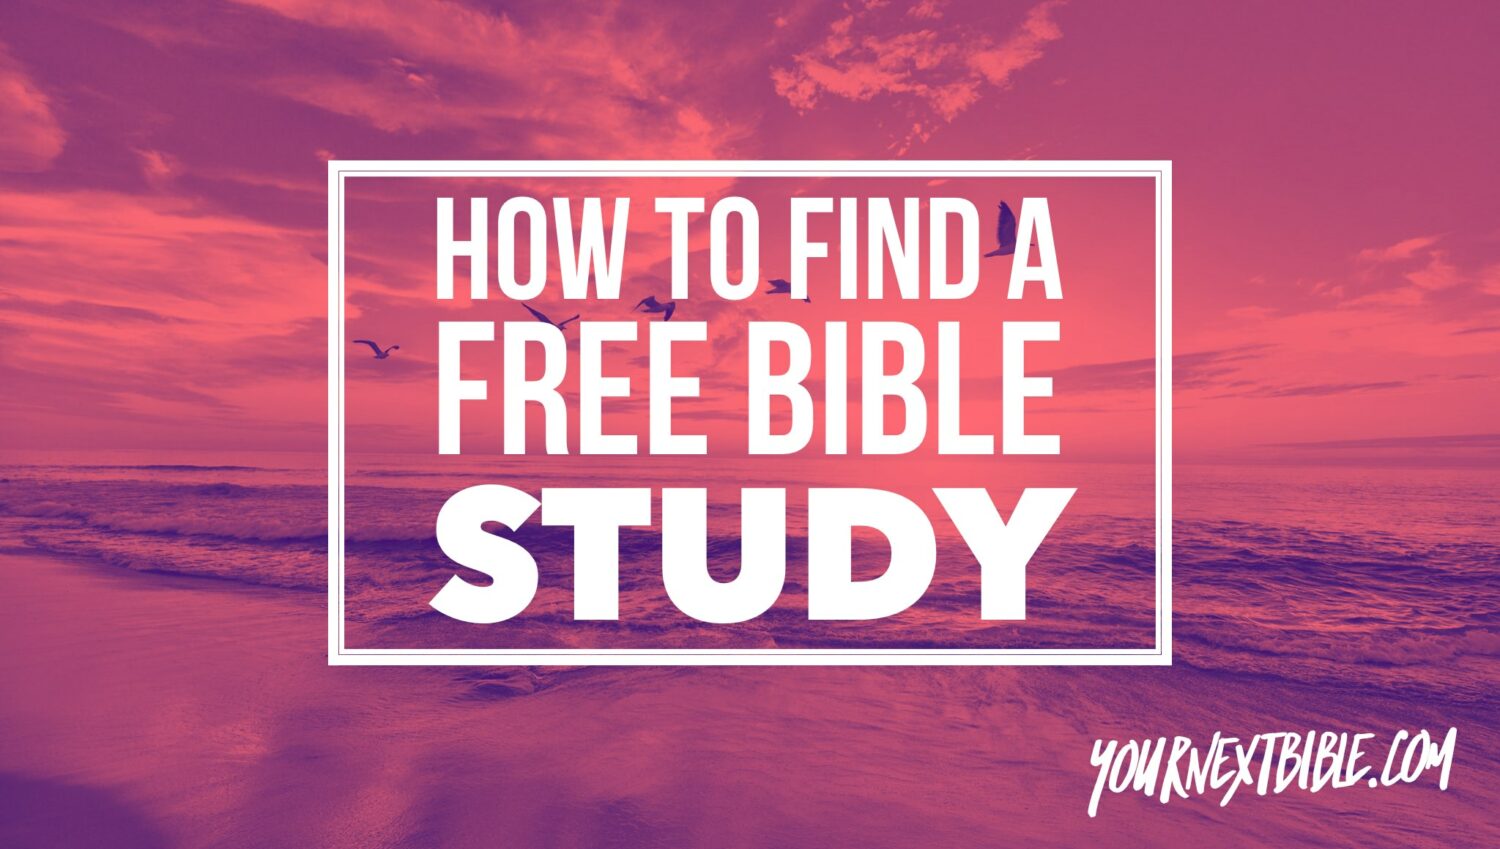 How to Find a FREE Bible Study